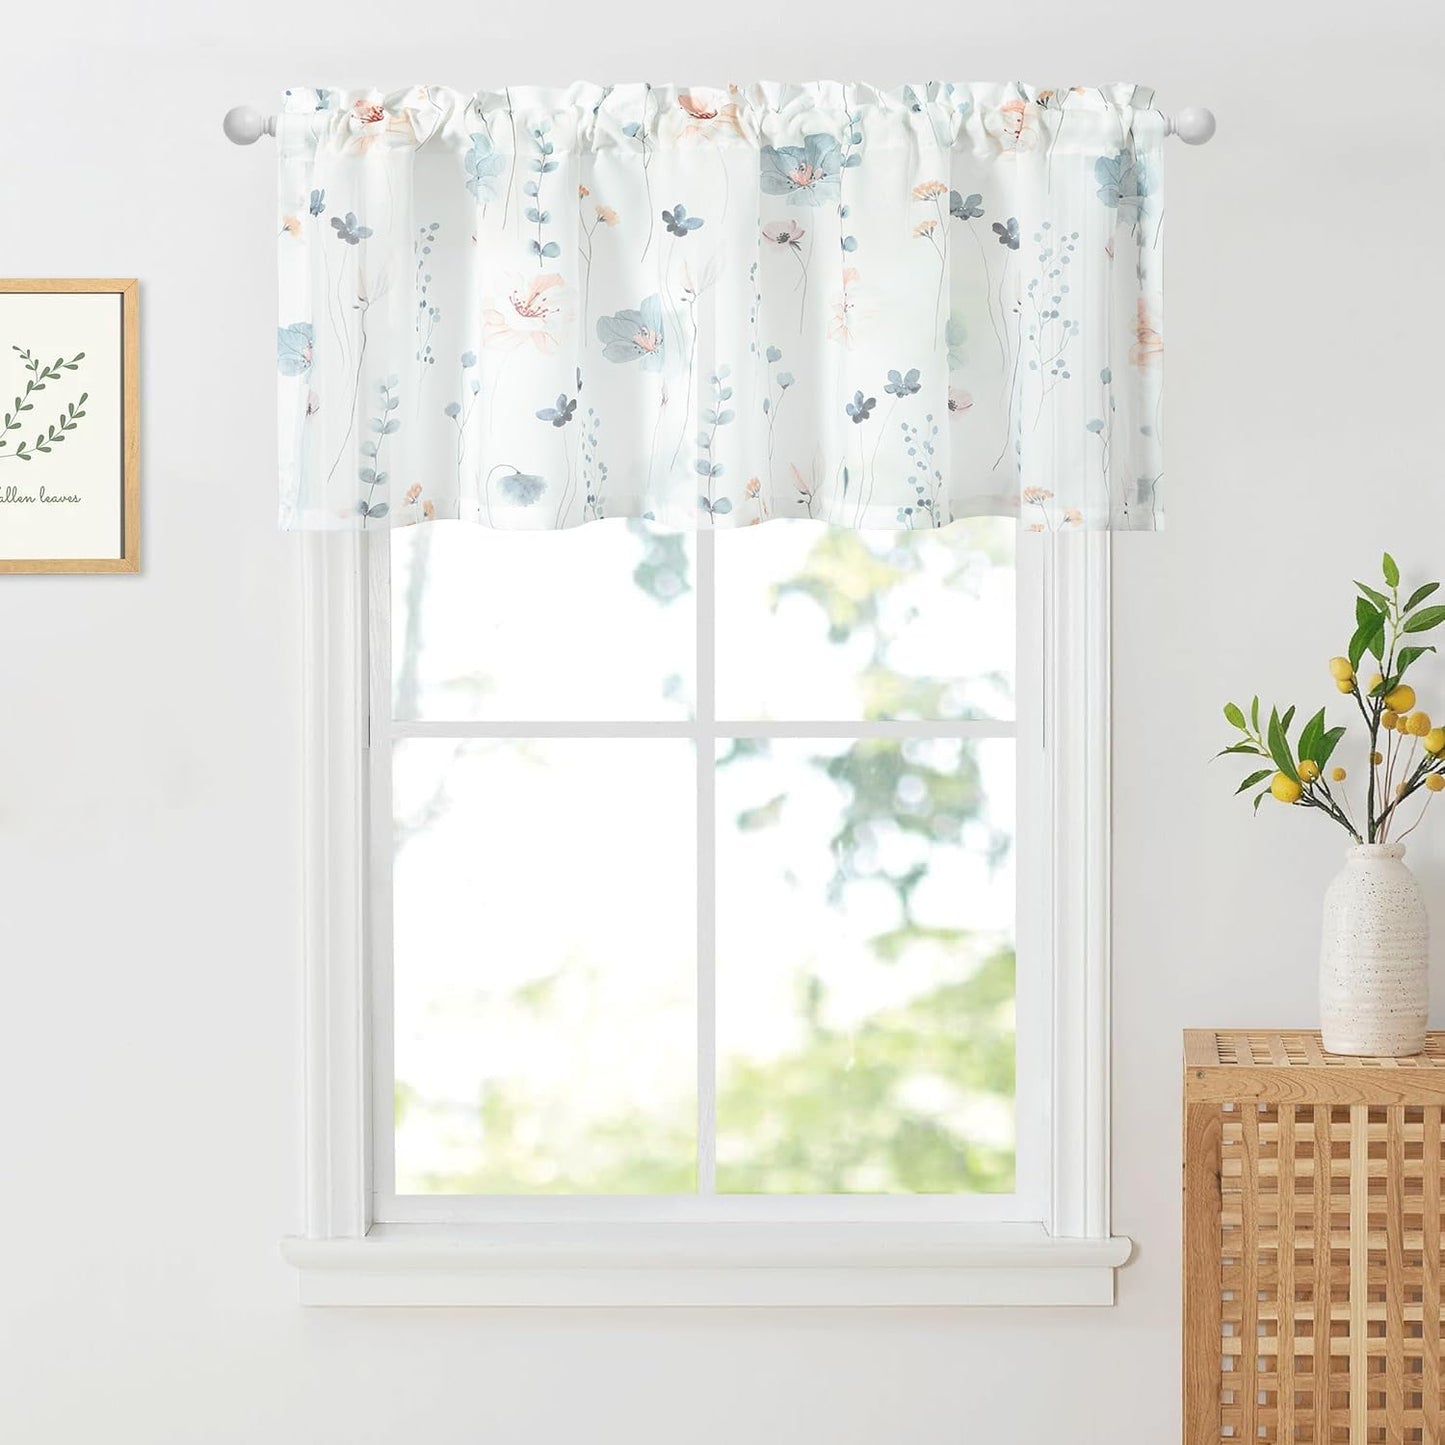 VOGOL Colorful Floral Print Tier Curtains, 2 Panels Smooth Textured Decorative Cafe Curtain, Rod Pocket Sheer Drapery for Farmhouse, W 30 X L 24  VOGOL Mn005 W52 X L18 